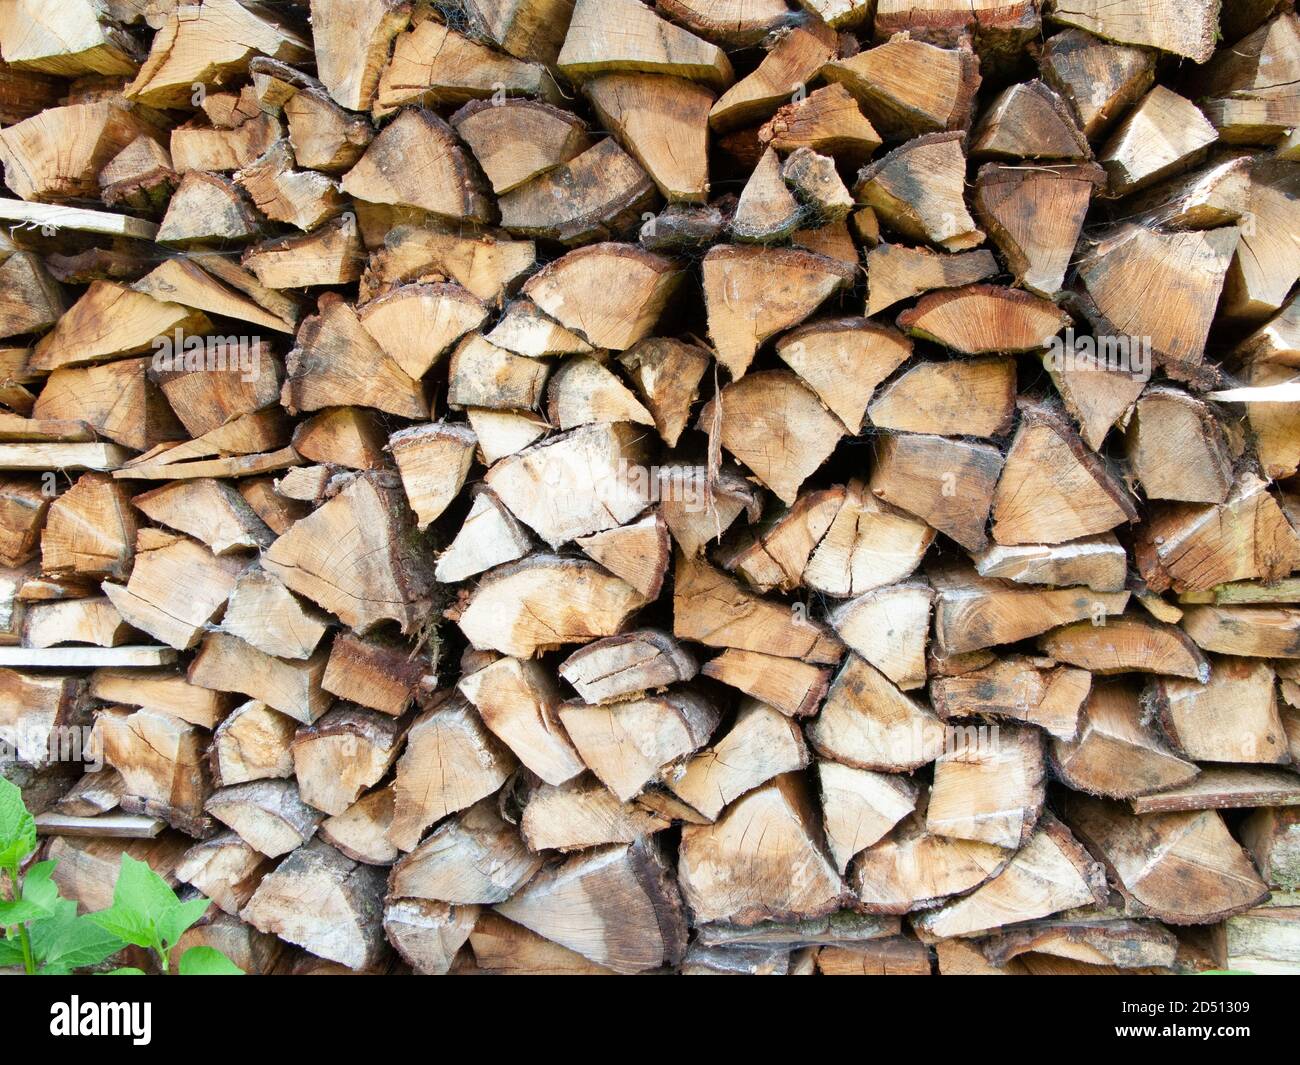 Stacked firewood ready to be used. Stock Photo